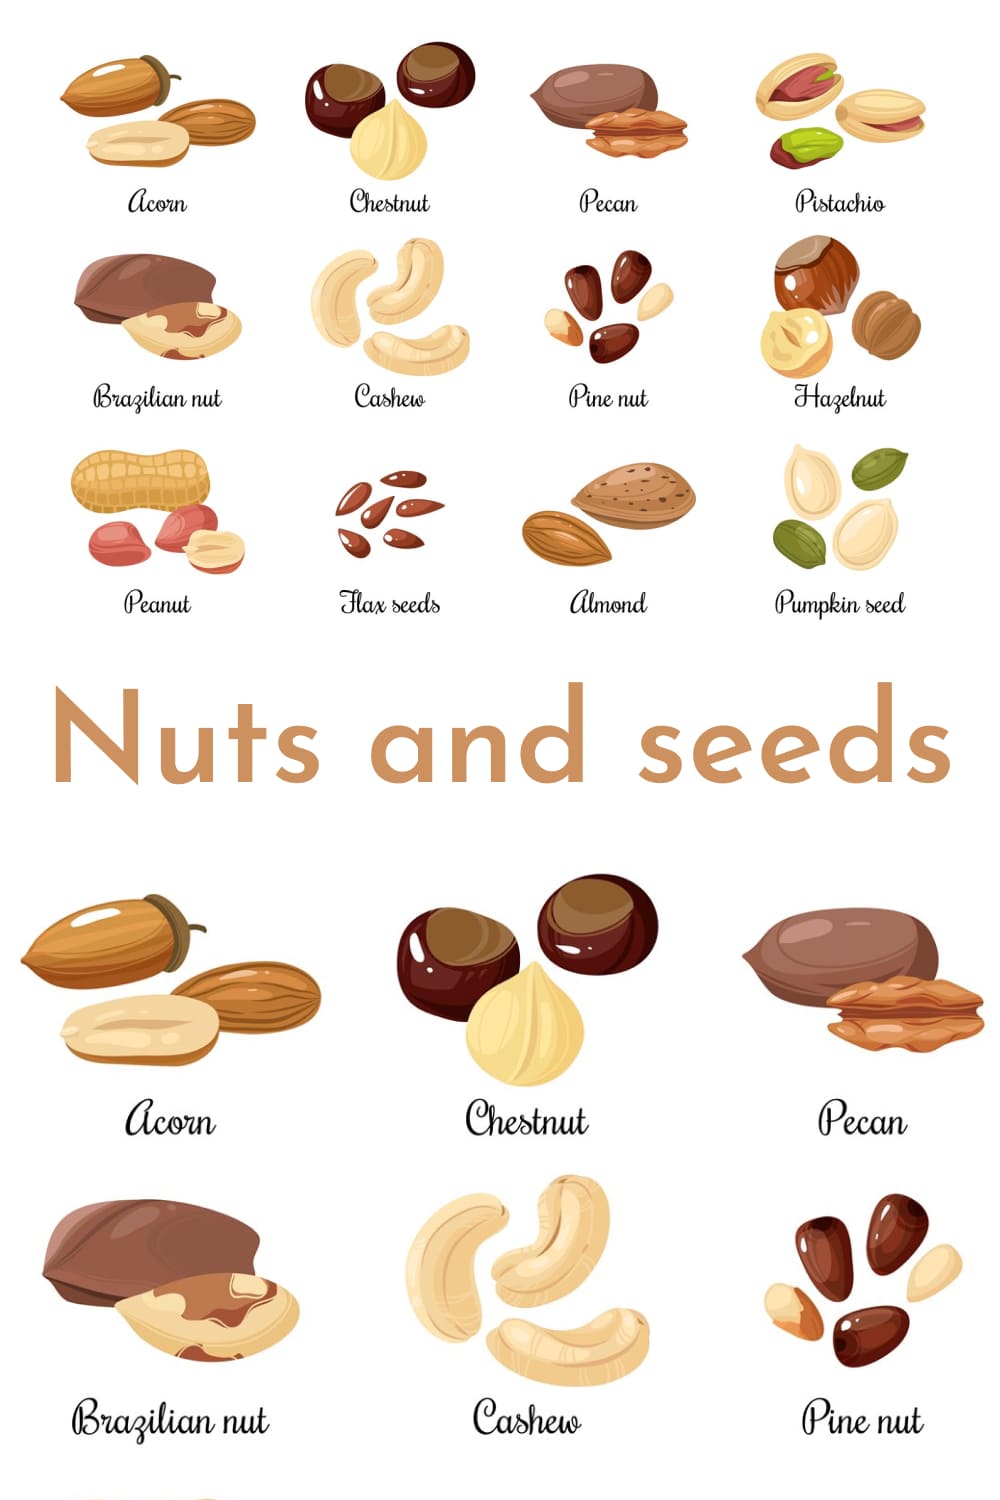 Nuts And Seeds. Almond And Pistachio, Acorn And Peanut, Chestnut, And Pecan - Pinterest.